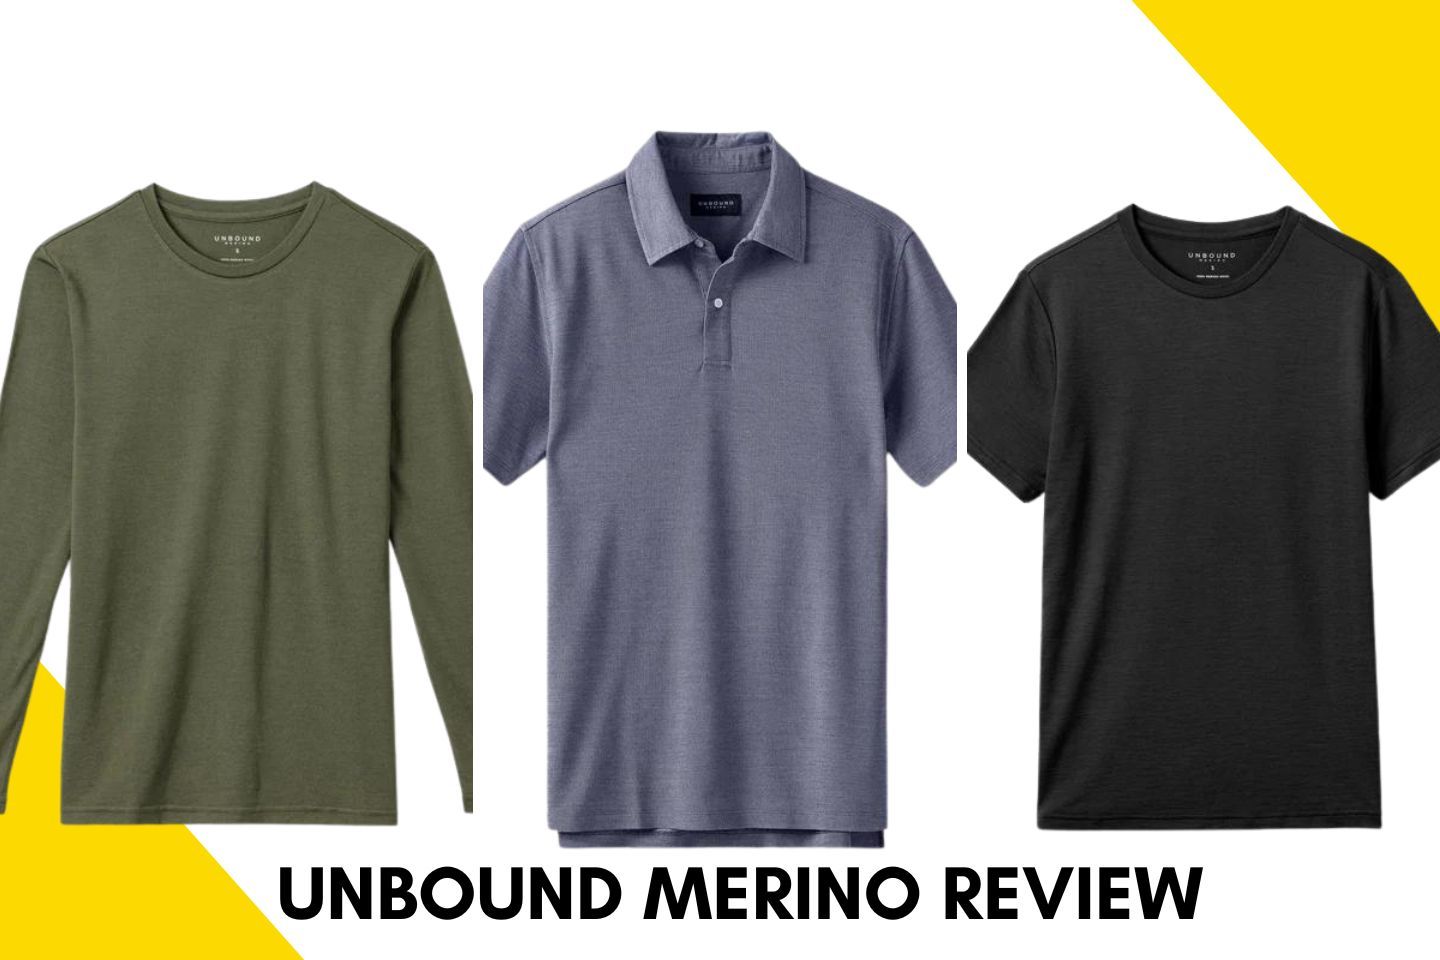 Unbound Merino Review: Are They Worth the Price?